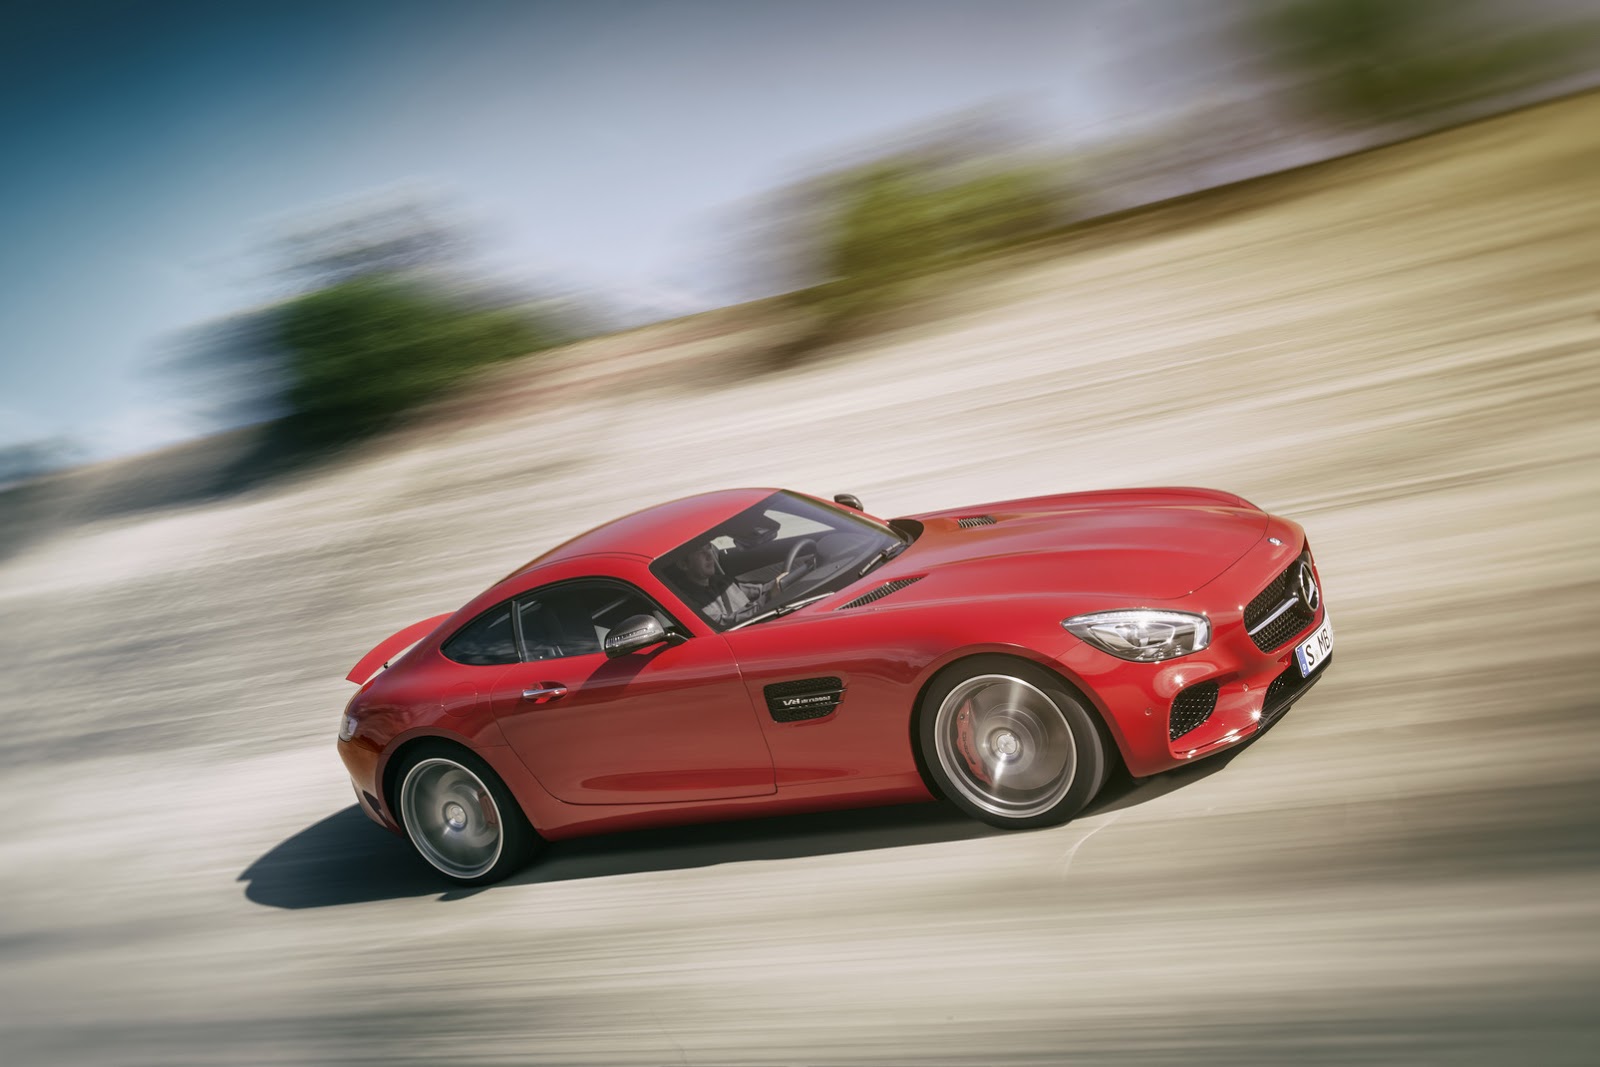 Mercedes-AMG-GT-Carscoops15